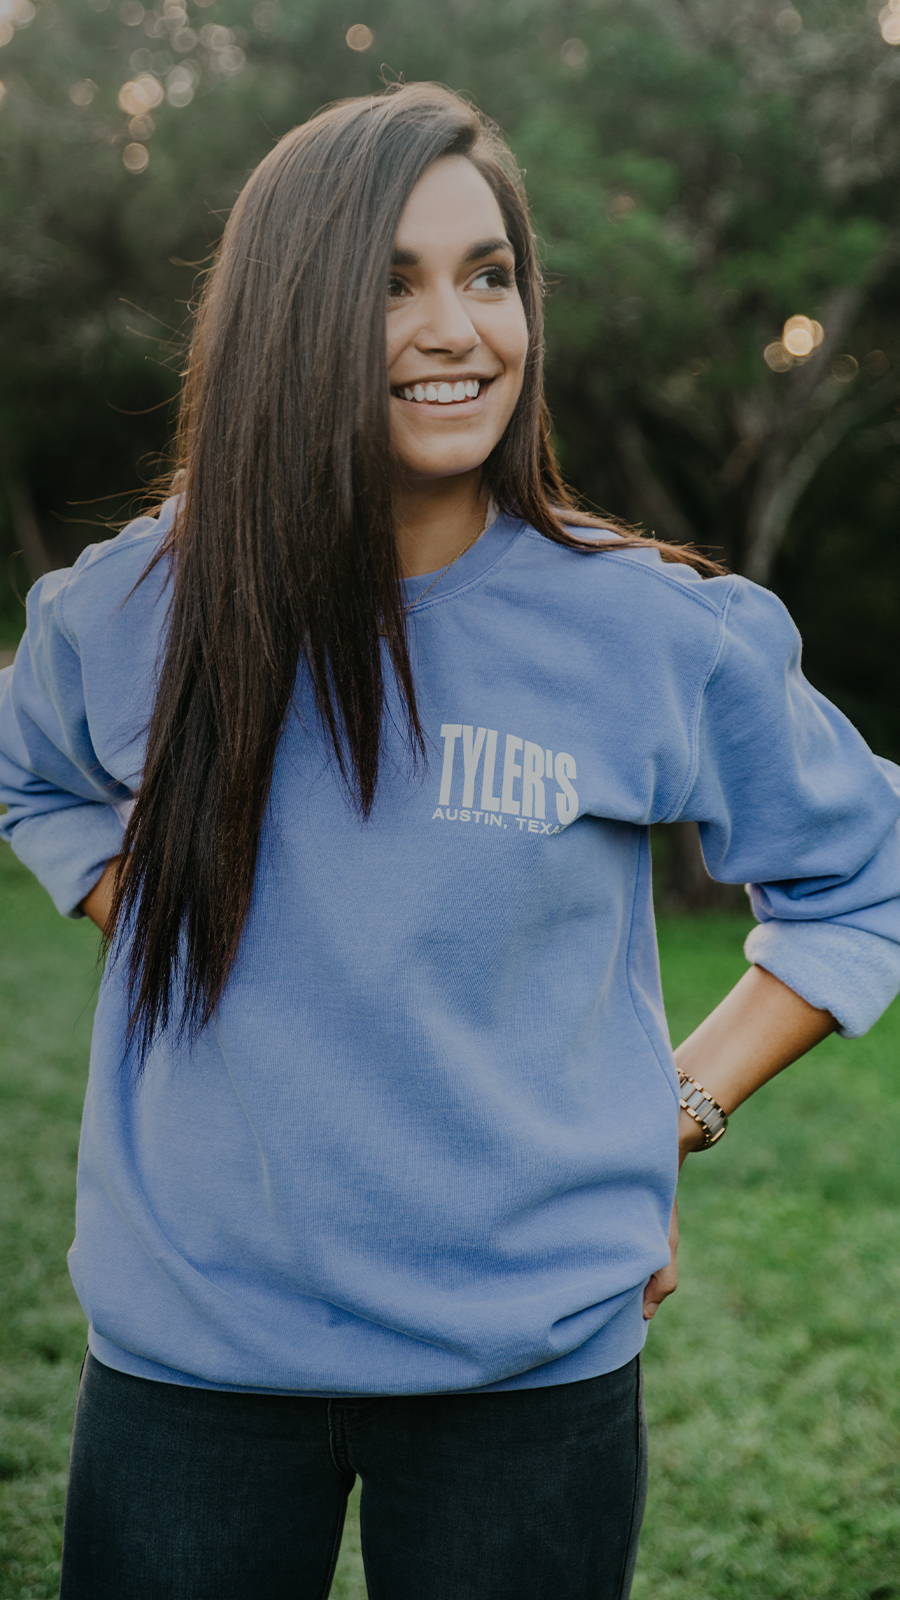 Young Woman wearing a TYLER'S sweatshirt in the park